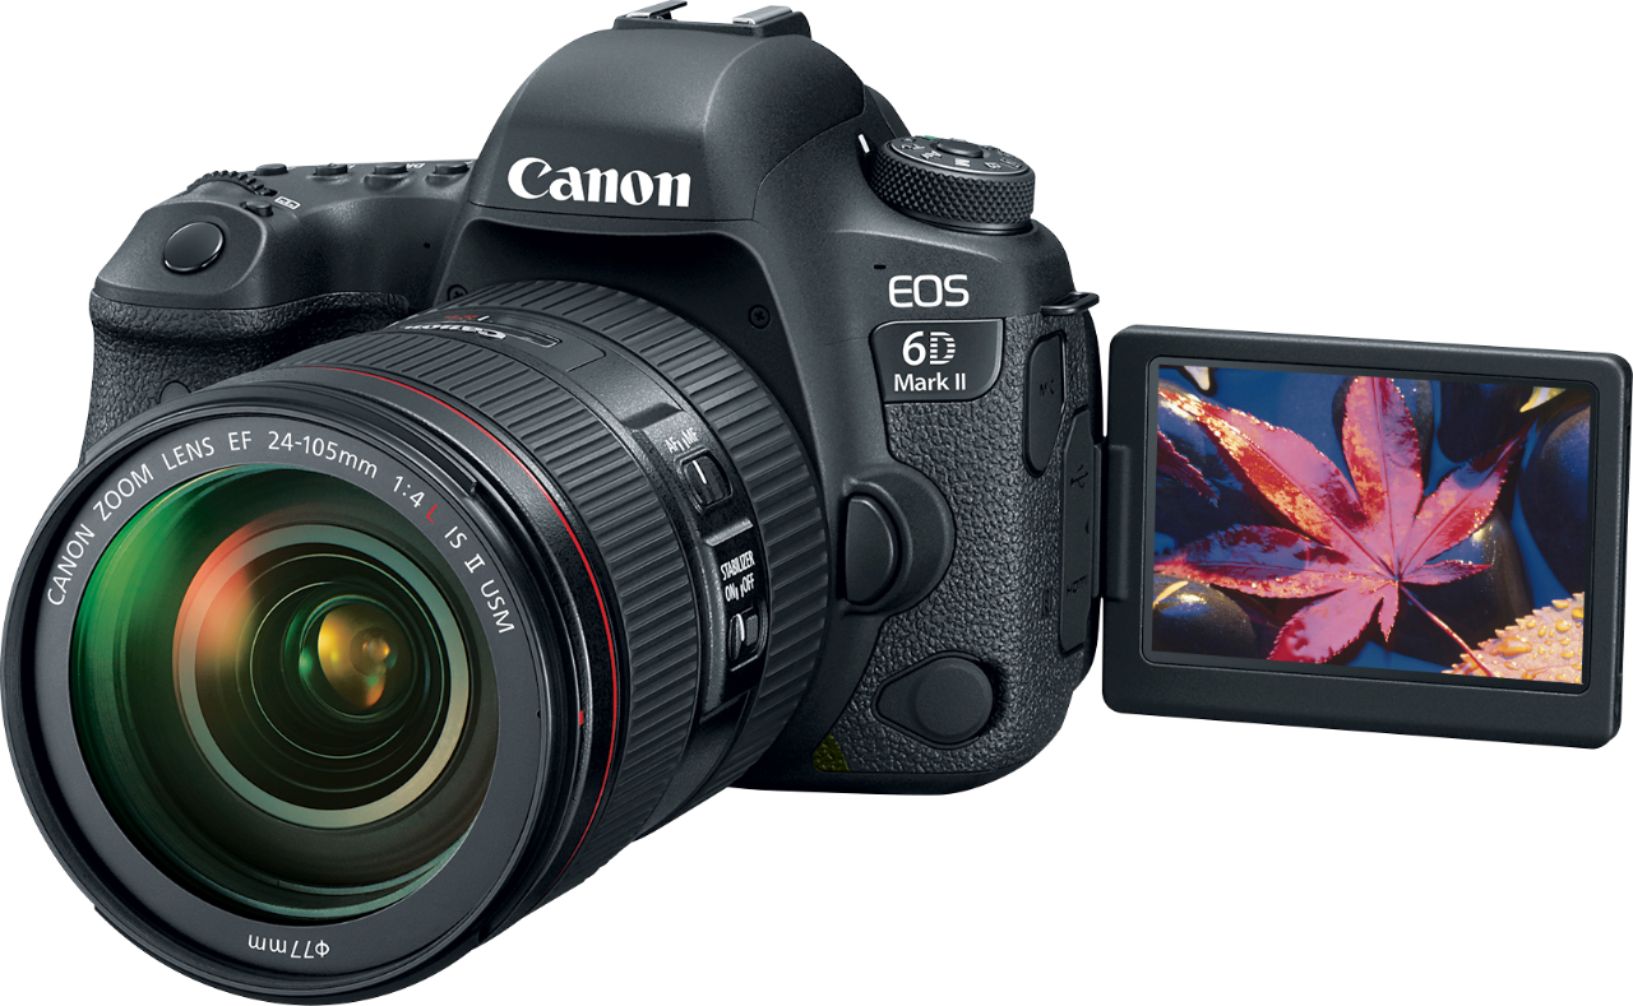 Canon EOS 6D Mark II DSLR Video Camera with EF 24-105mm f/4L IS II